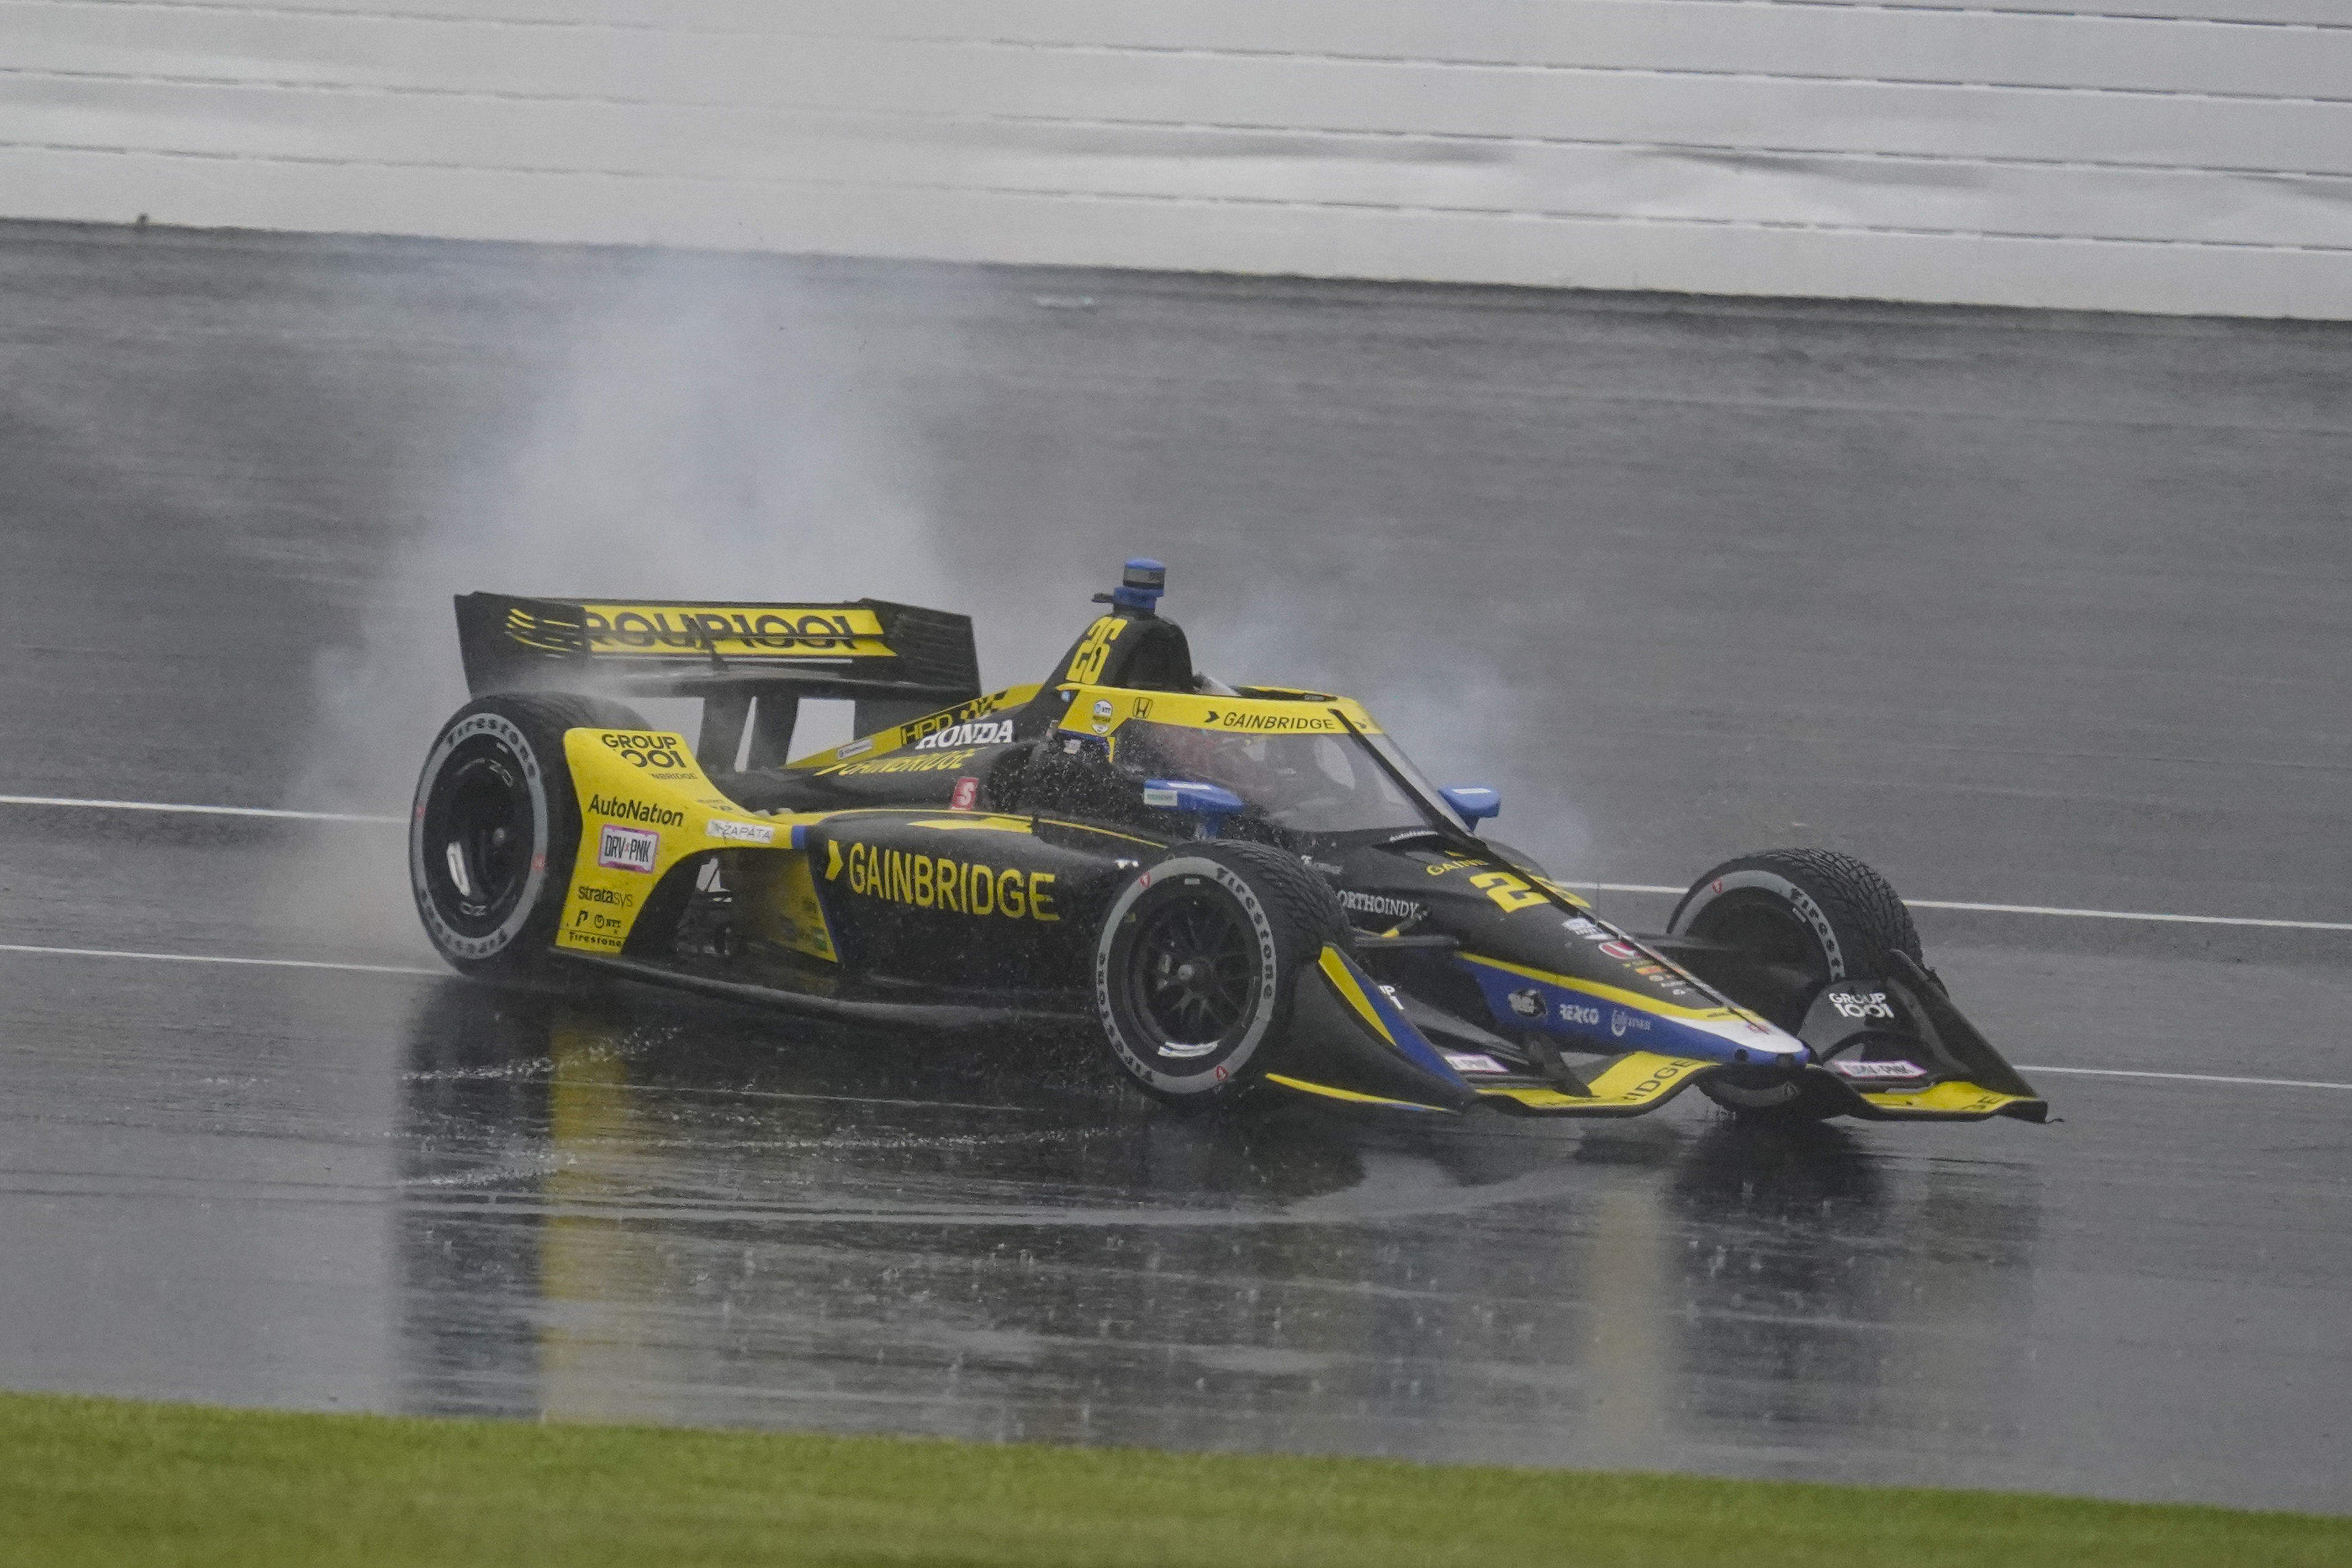 IndyCar's aeroscreen gets mixed reviews in 1st rain test